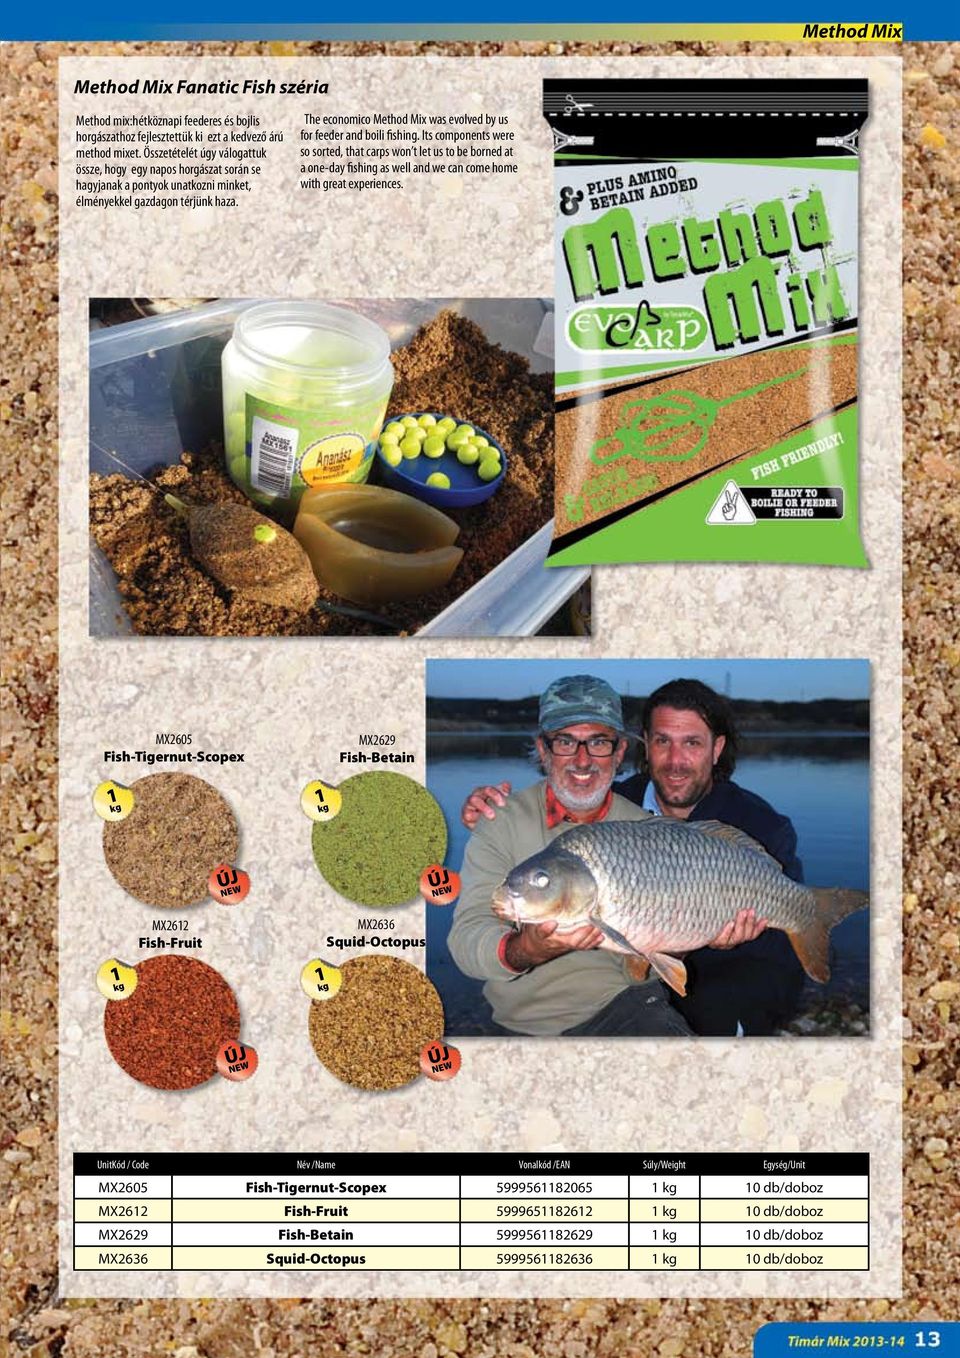 The economico Method Mix was evolved by us for feeder and boili fishing.